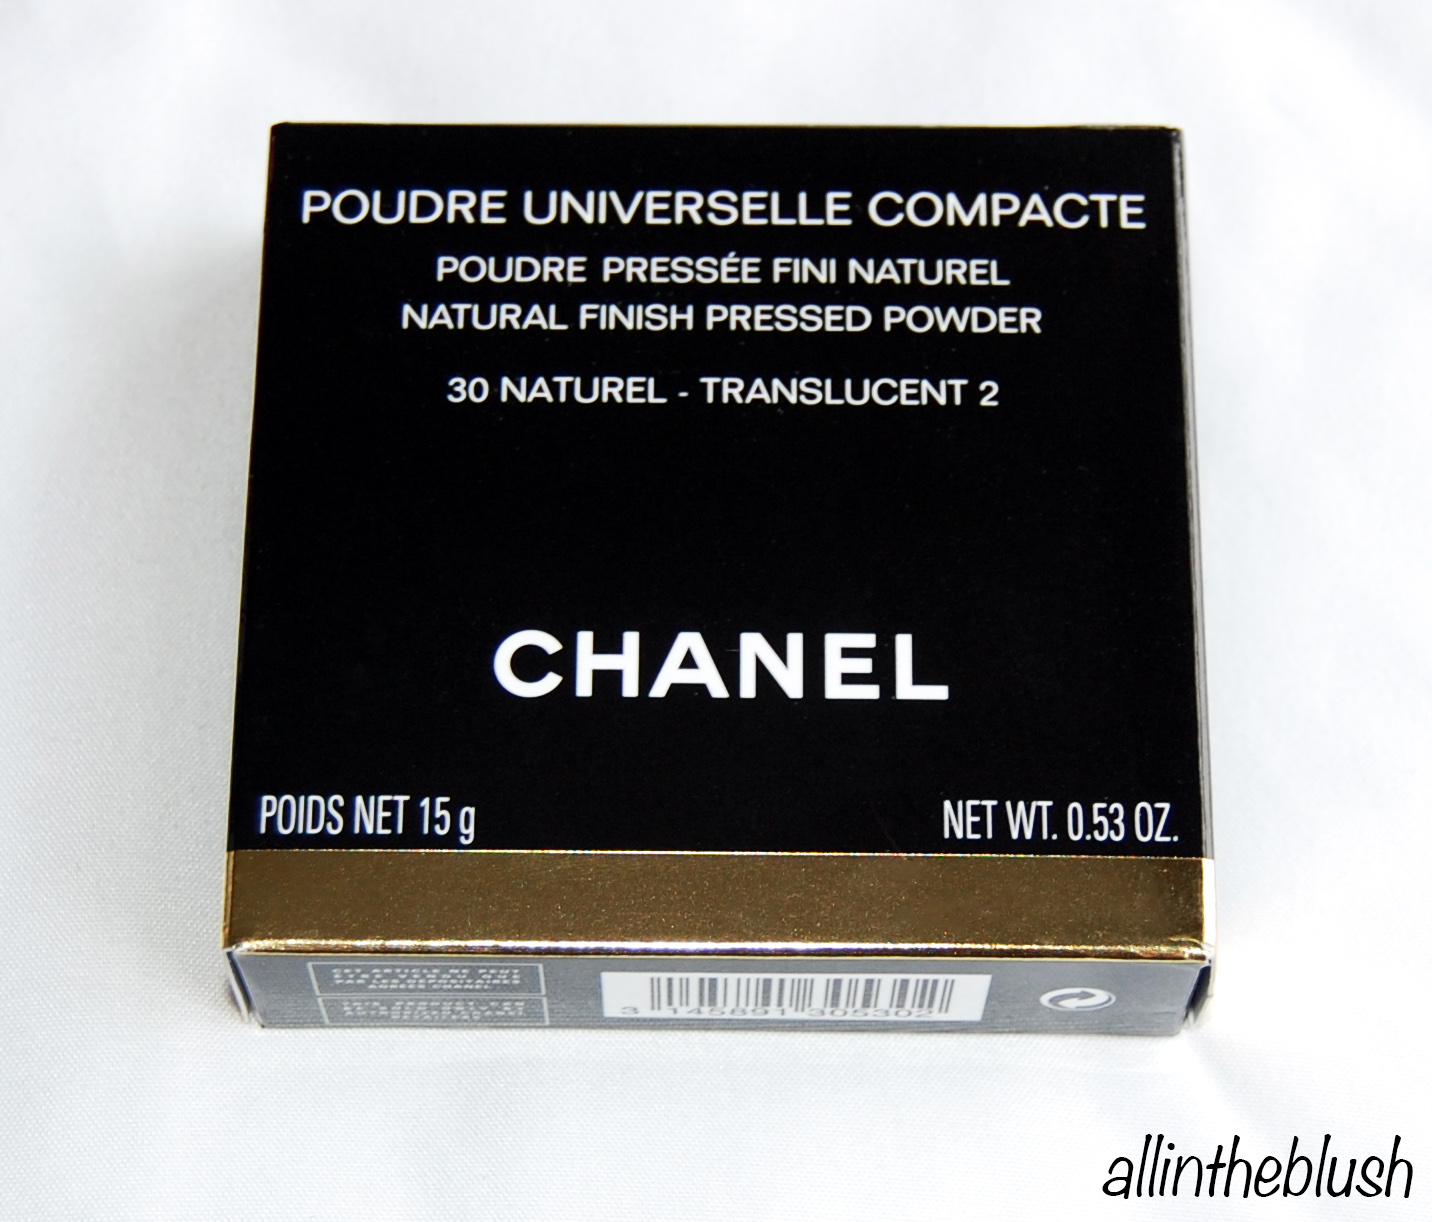 Chanel Universelle - All In The Blush